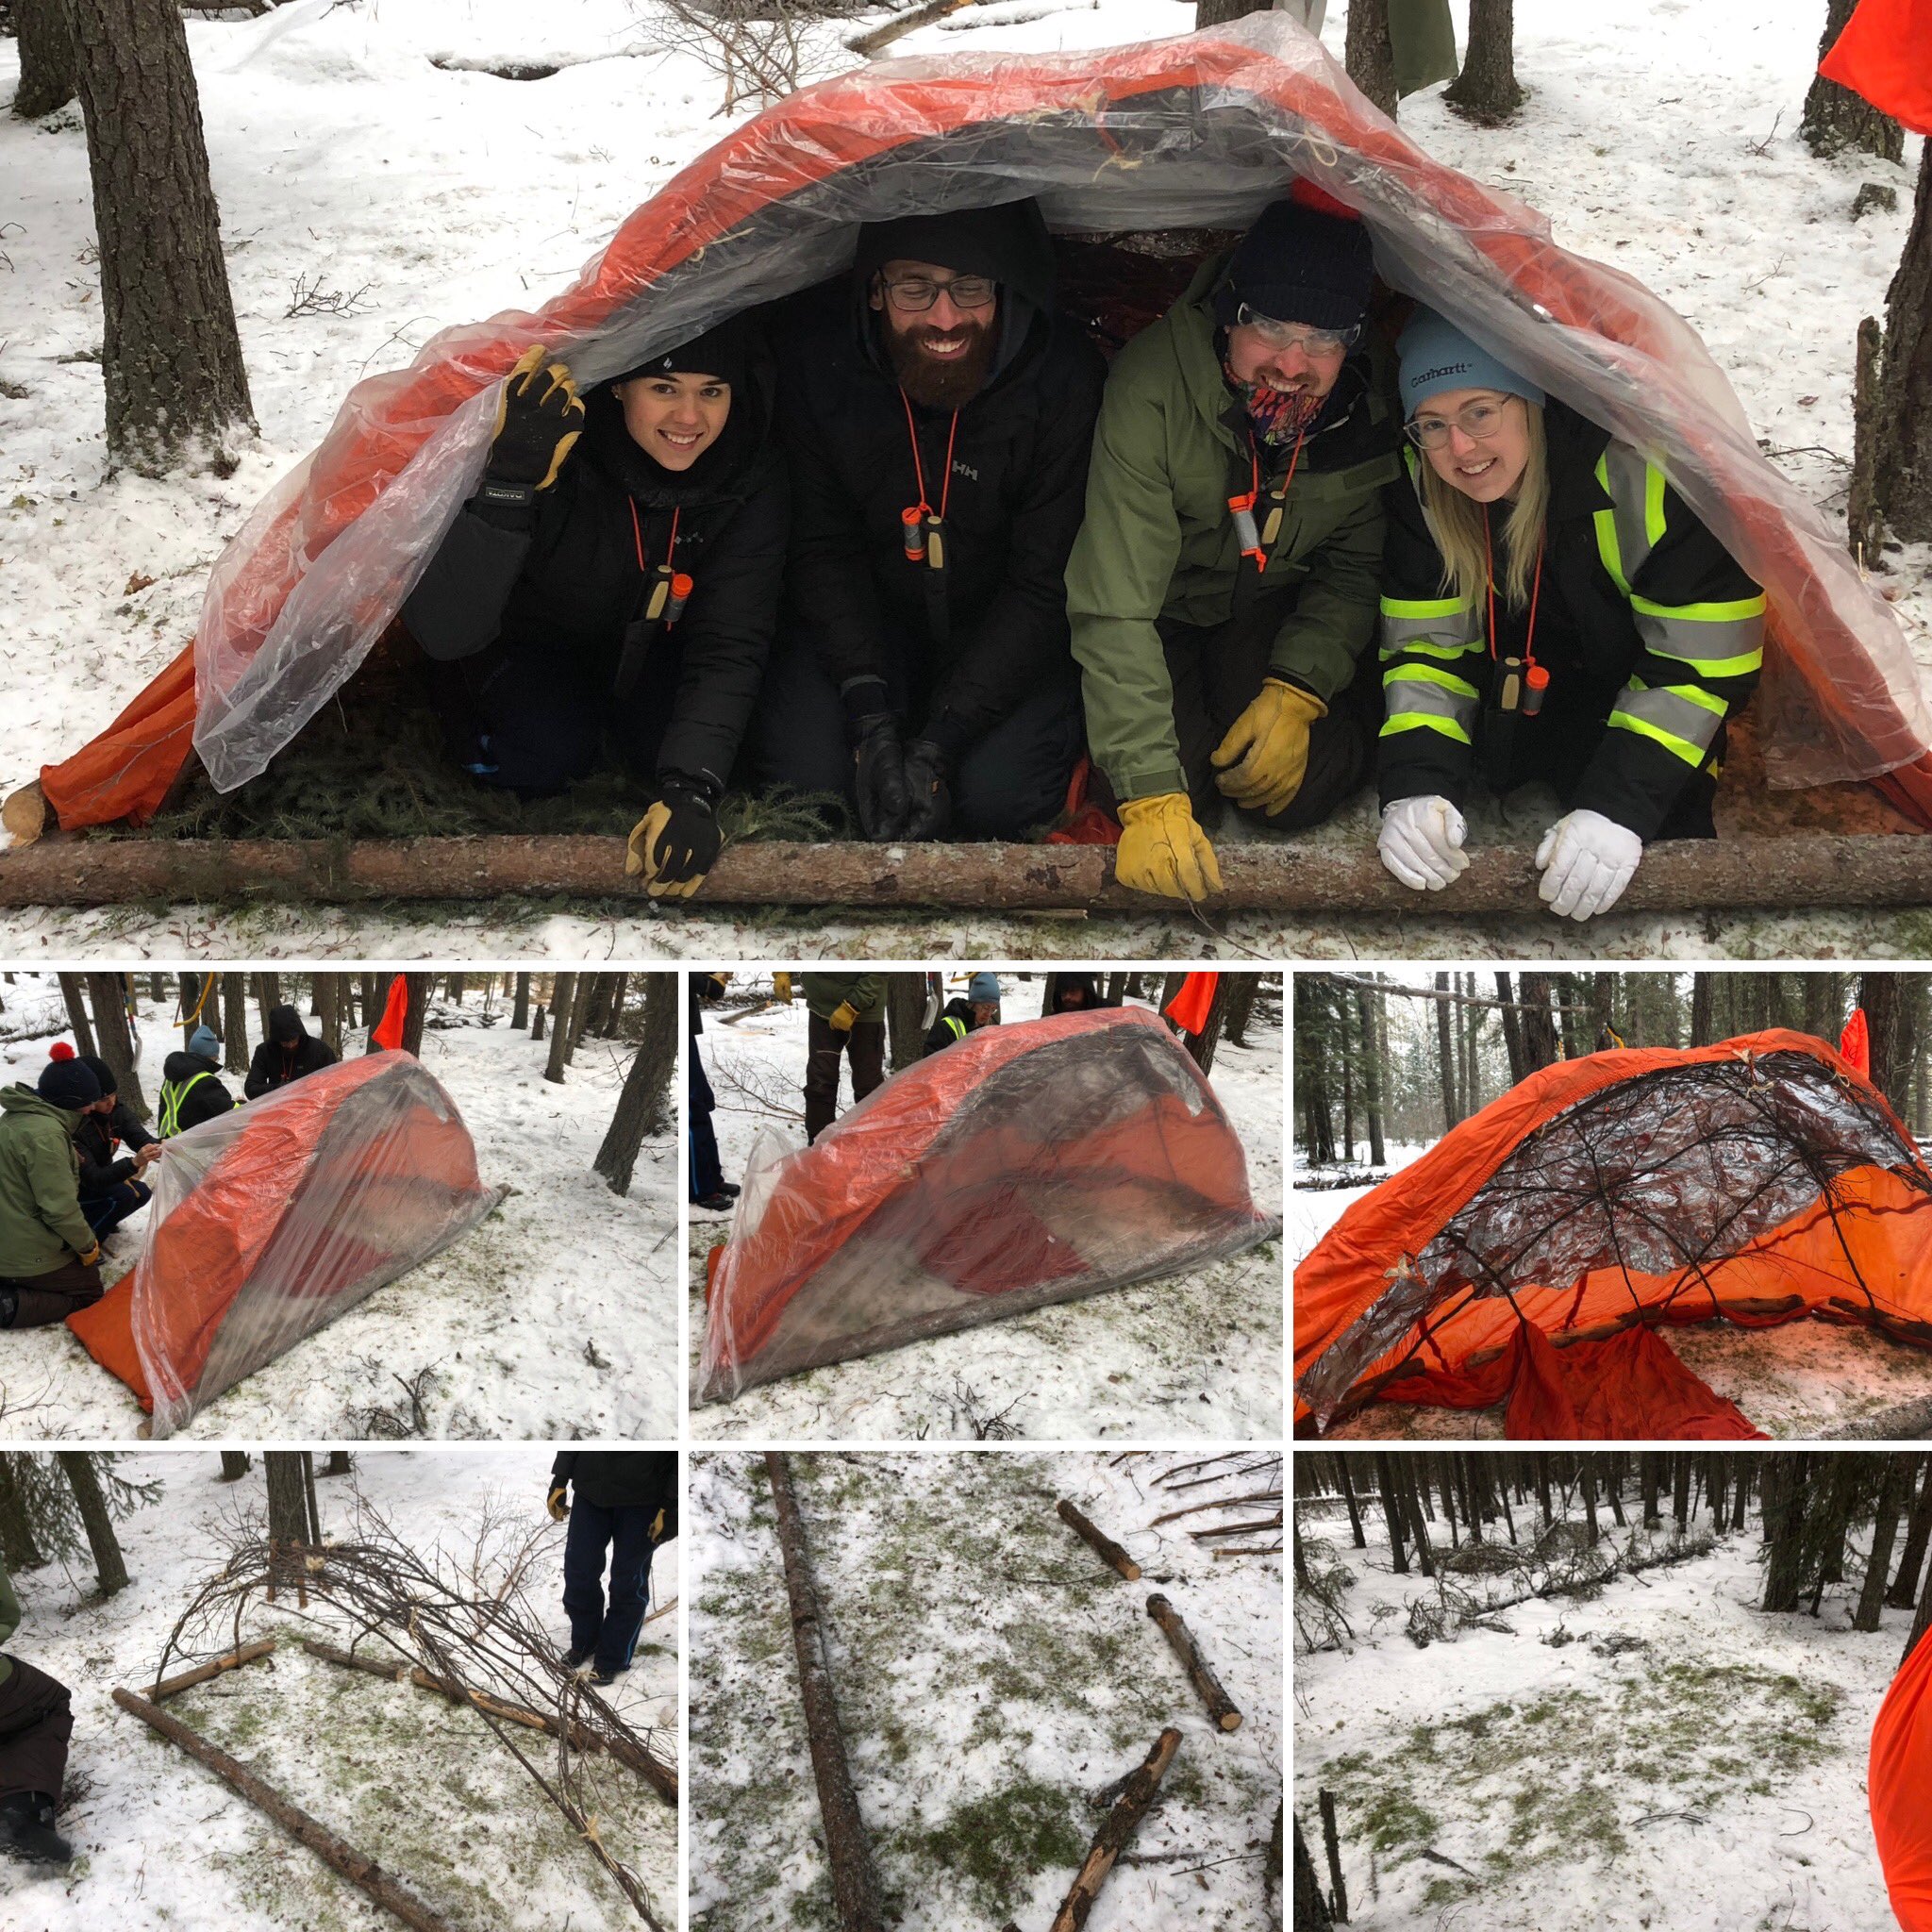 Bruce Zawalsky 🇨🇦 (he/him) on X: Building a Single Super Shelter today  in Northern Saskatchewan while conducting a Winter Field Session #survival # bushcraft #outdoors #bushcraftshelter #outdoorlearning   / X